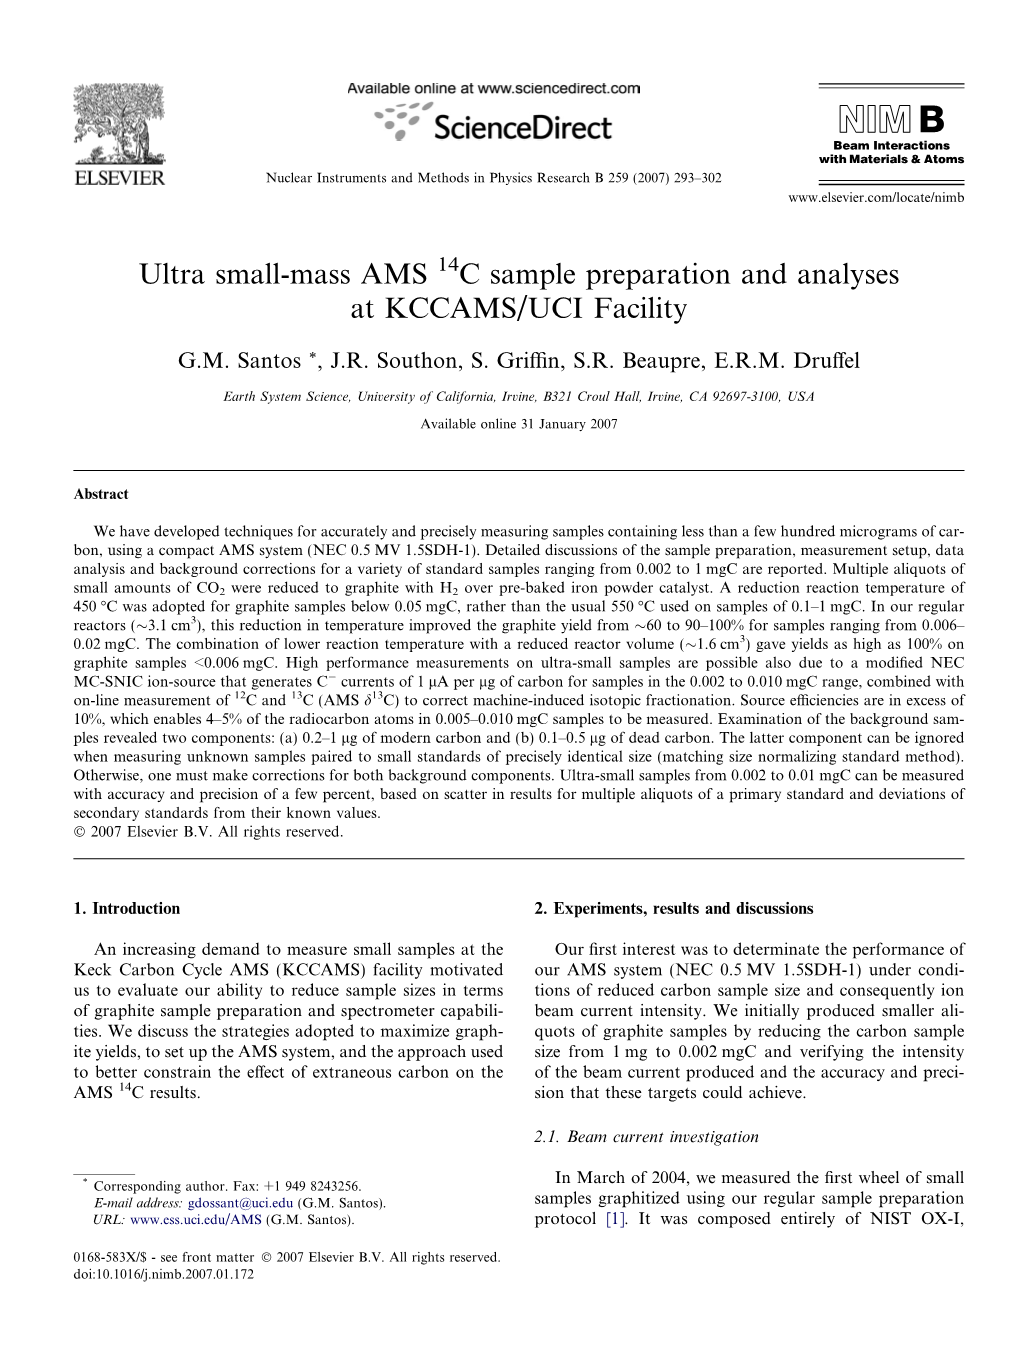 Ultra Small-Mass AMS C Sample Preparation and Analyses At